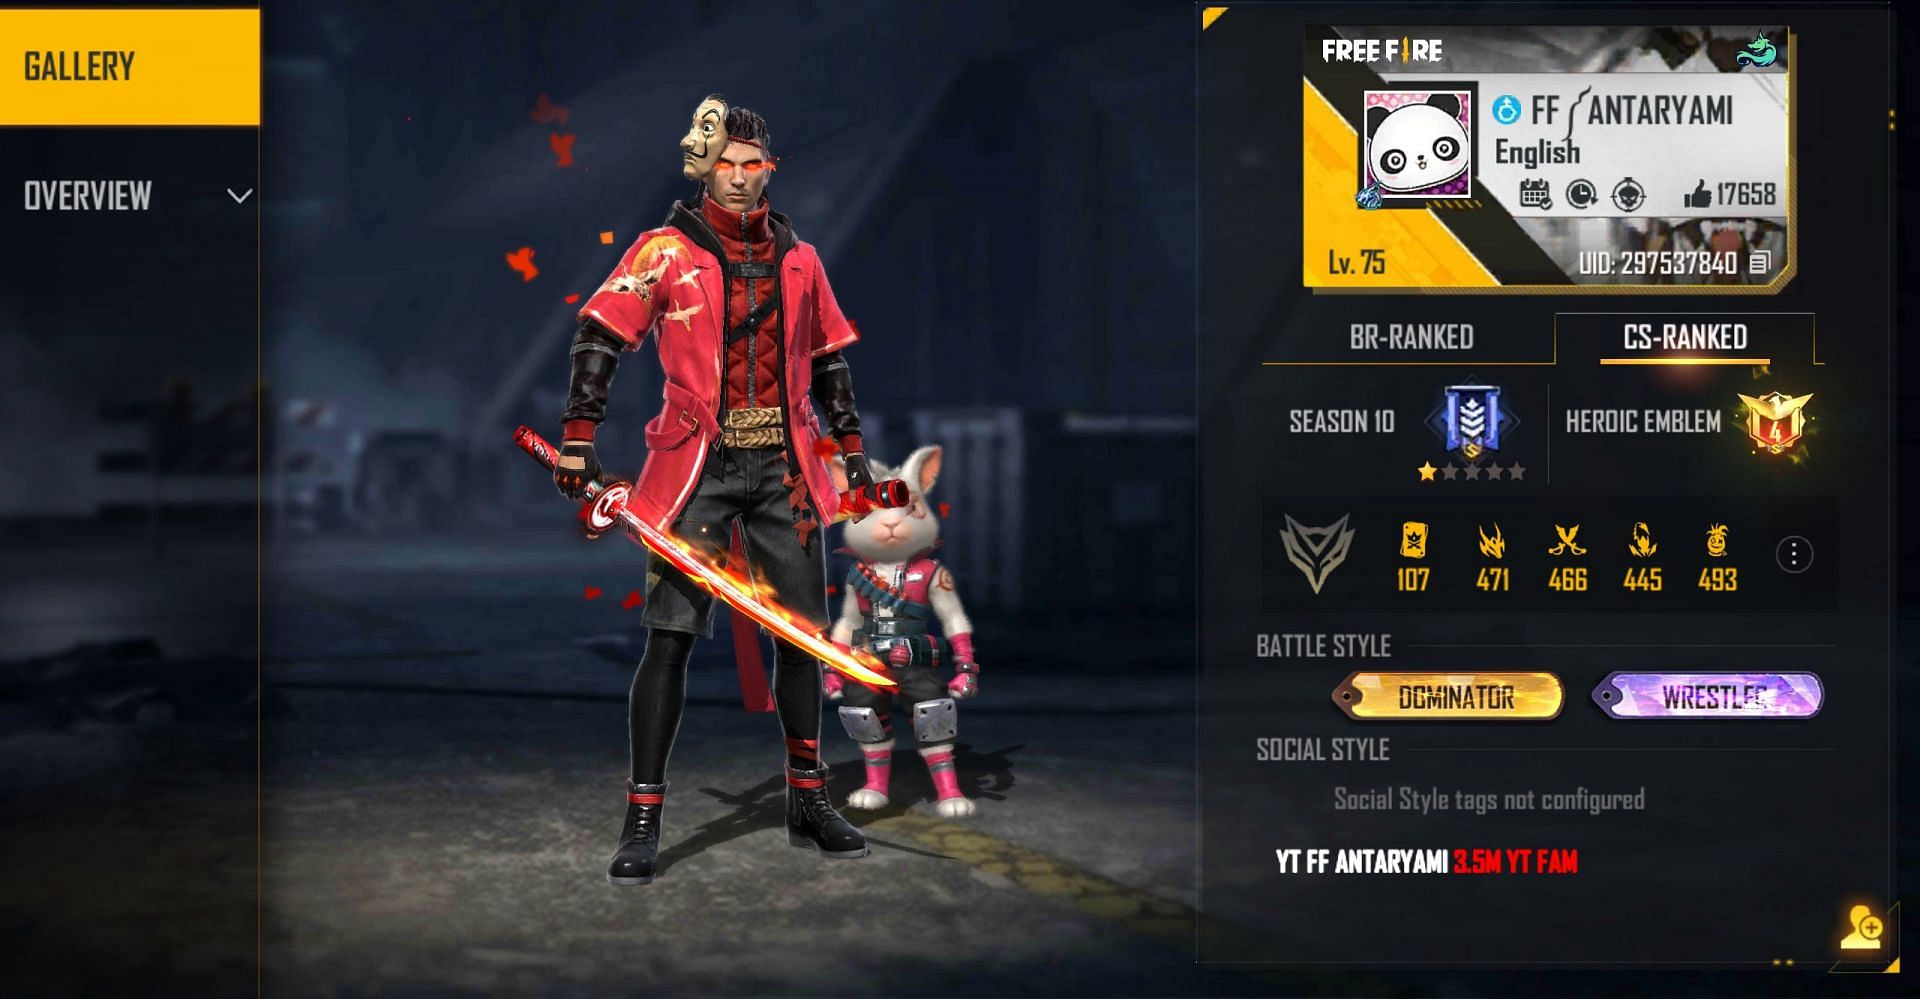 FF Antaryami's Free Fire ID, stats, real name, guild, earnings ...